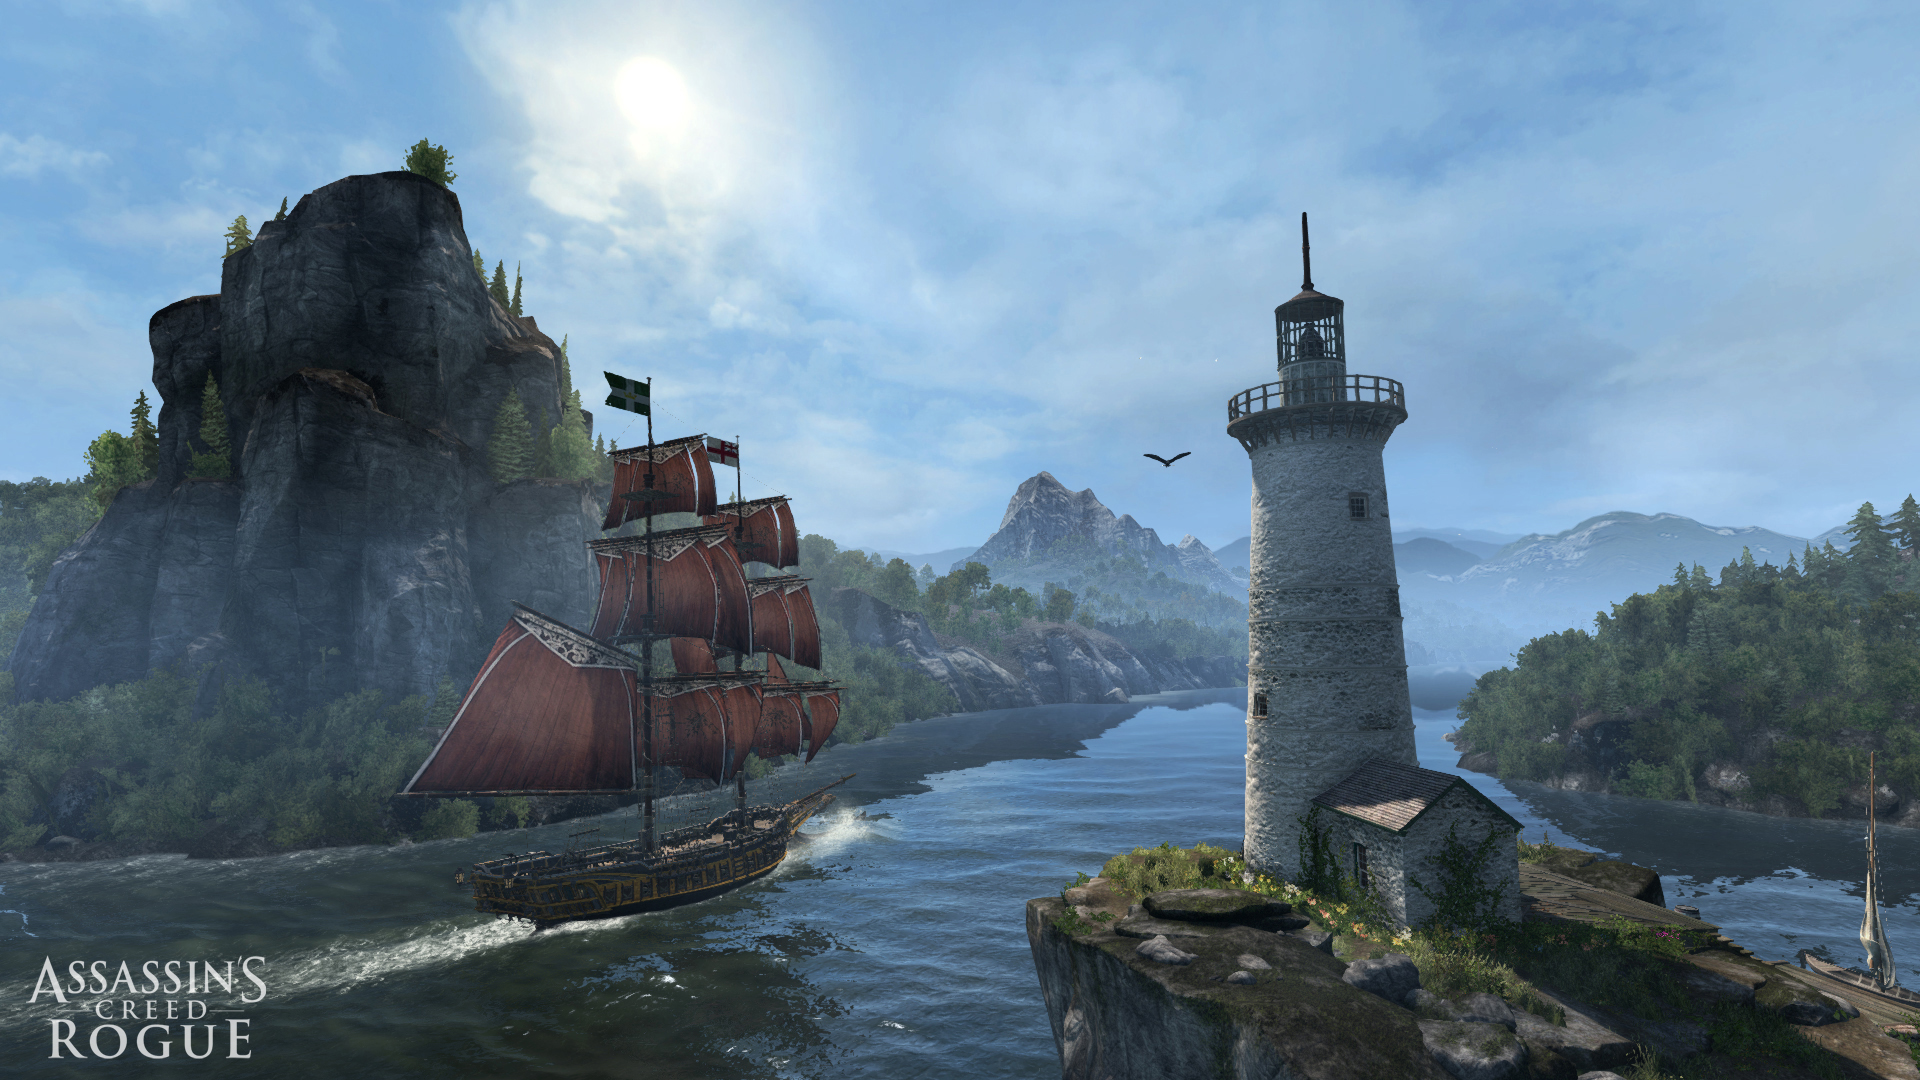 Assassin's Creed Rogue Gallery #11